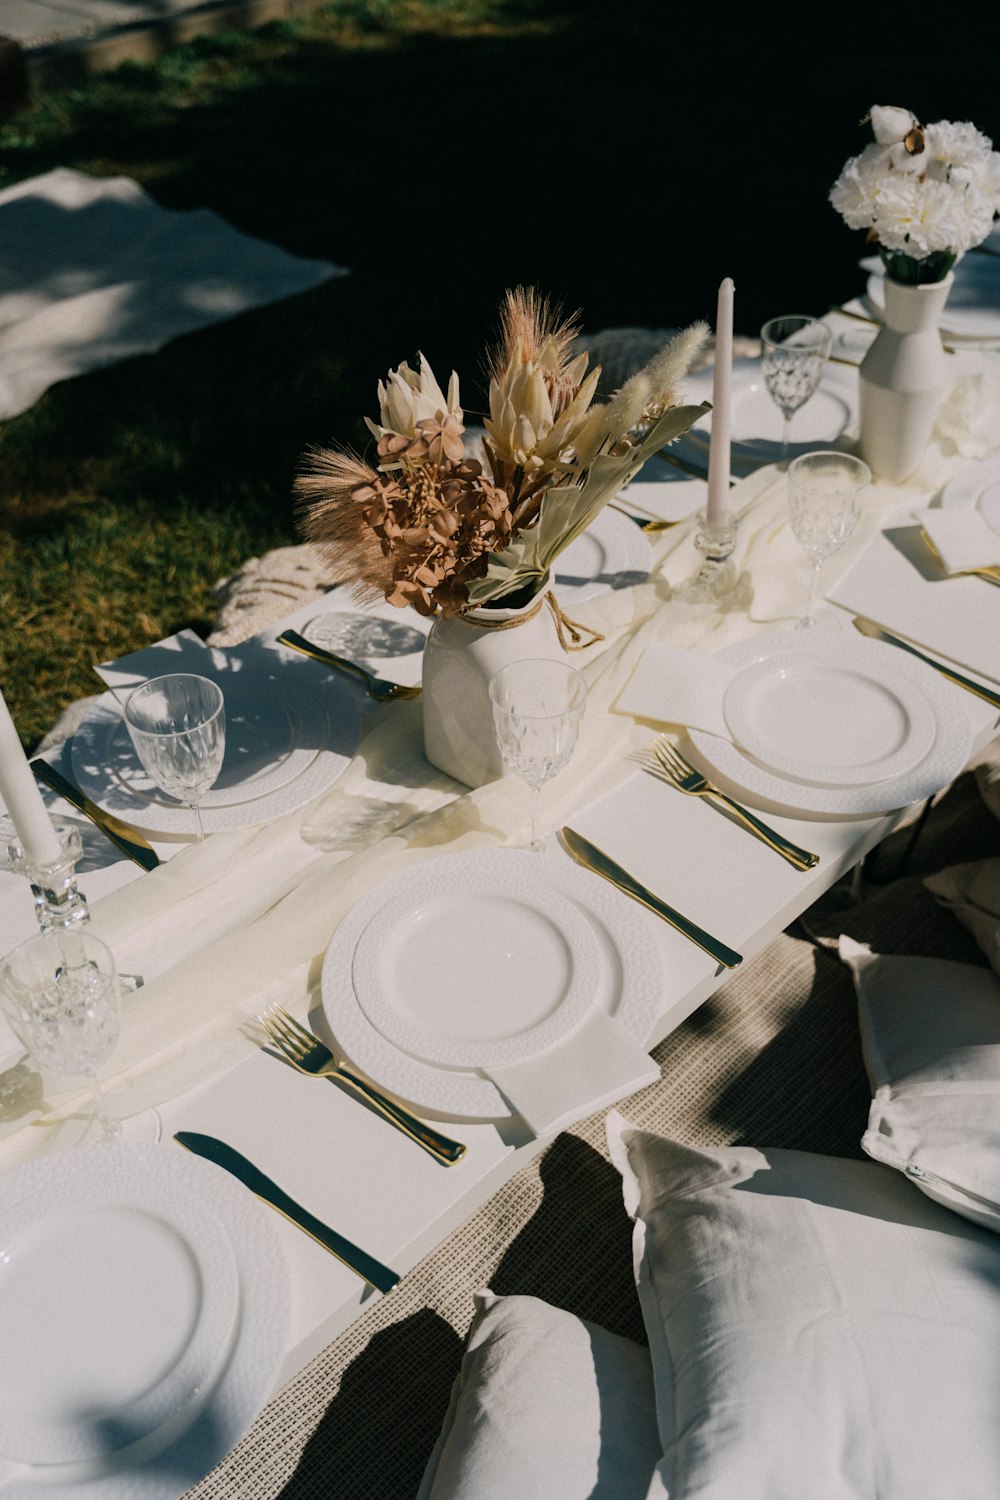 a table set with plates and glasses